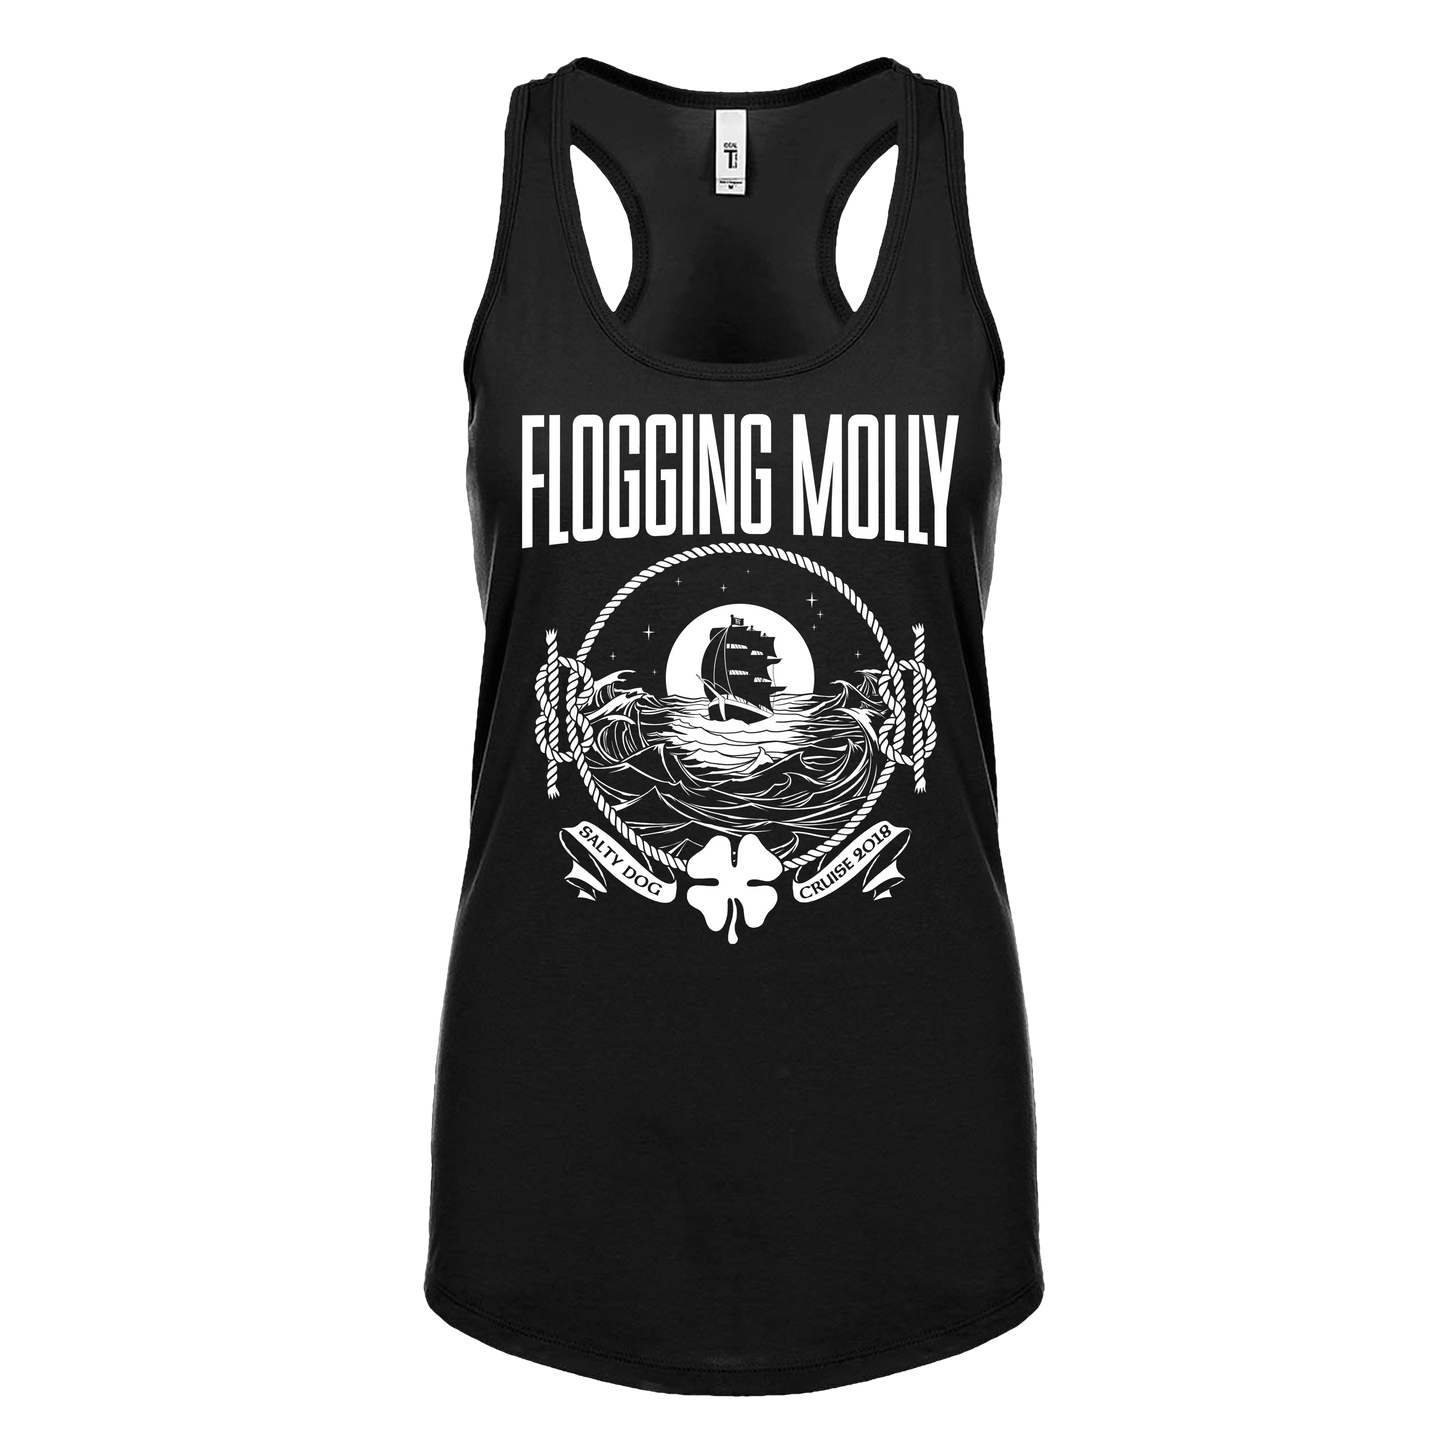 Salty Dog Cruise 2018 Event Tank Top - Ladies